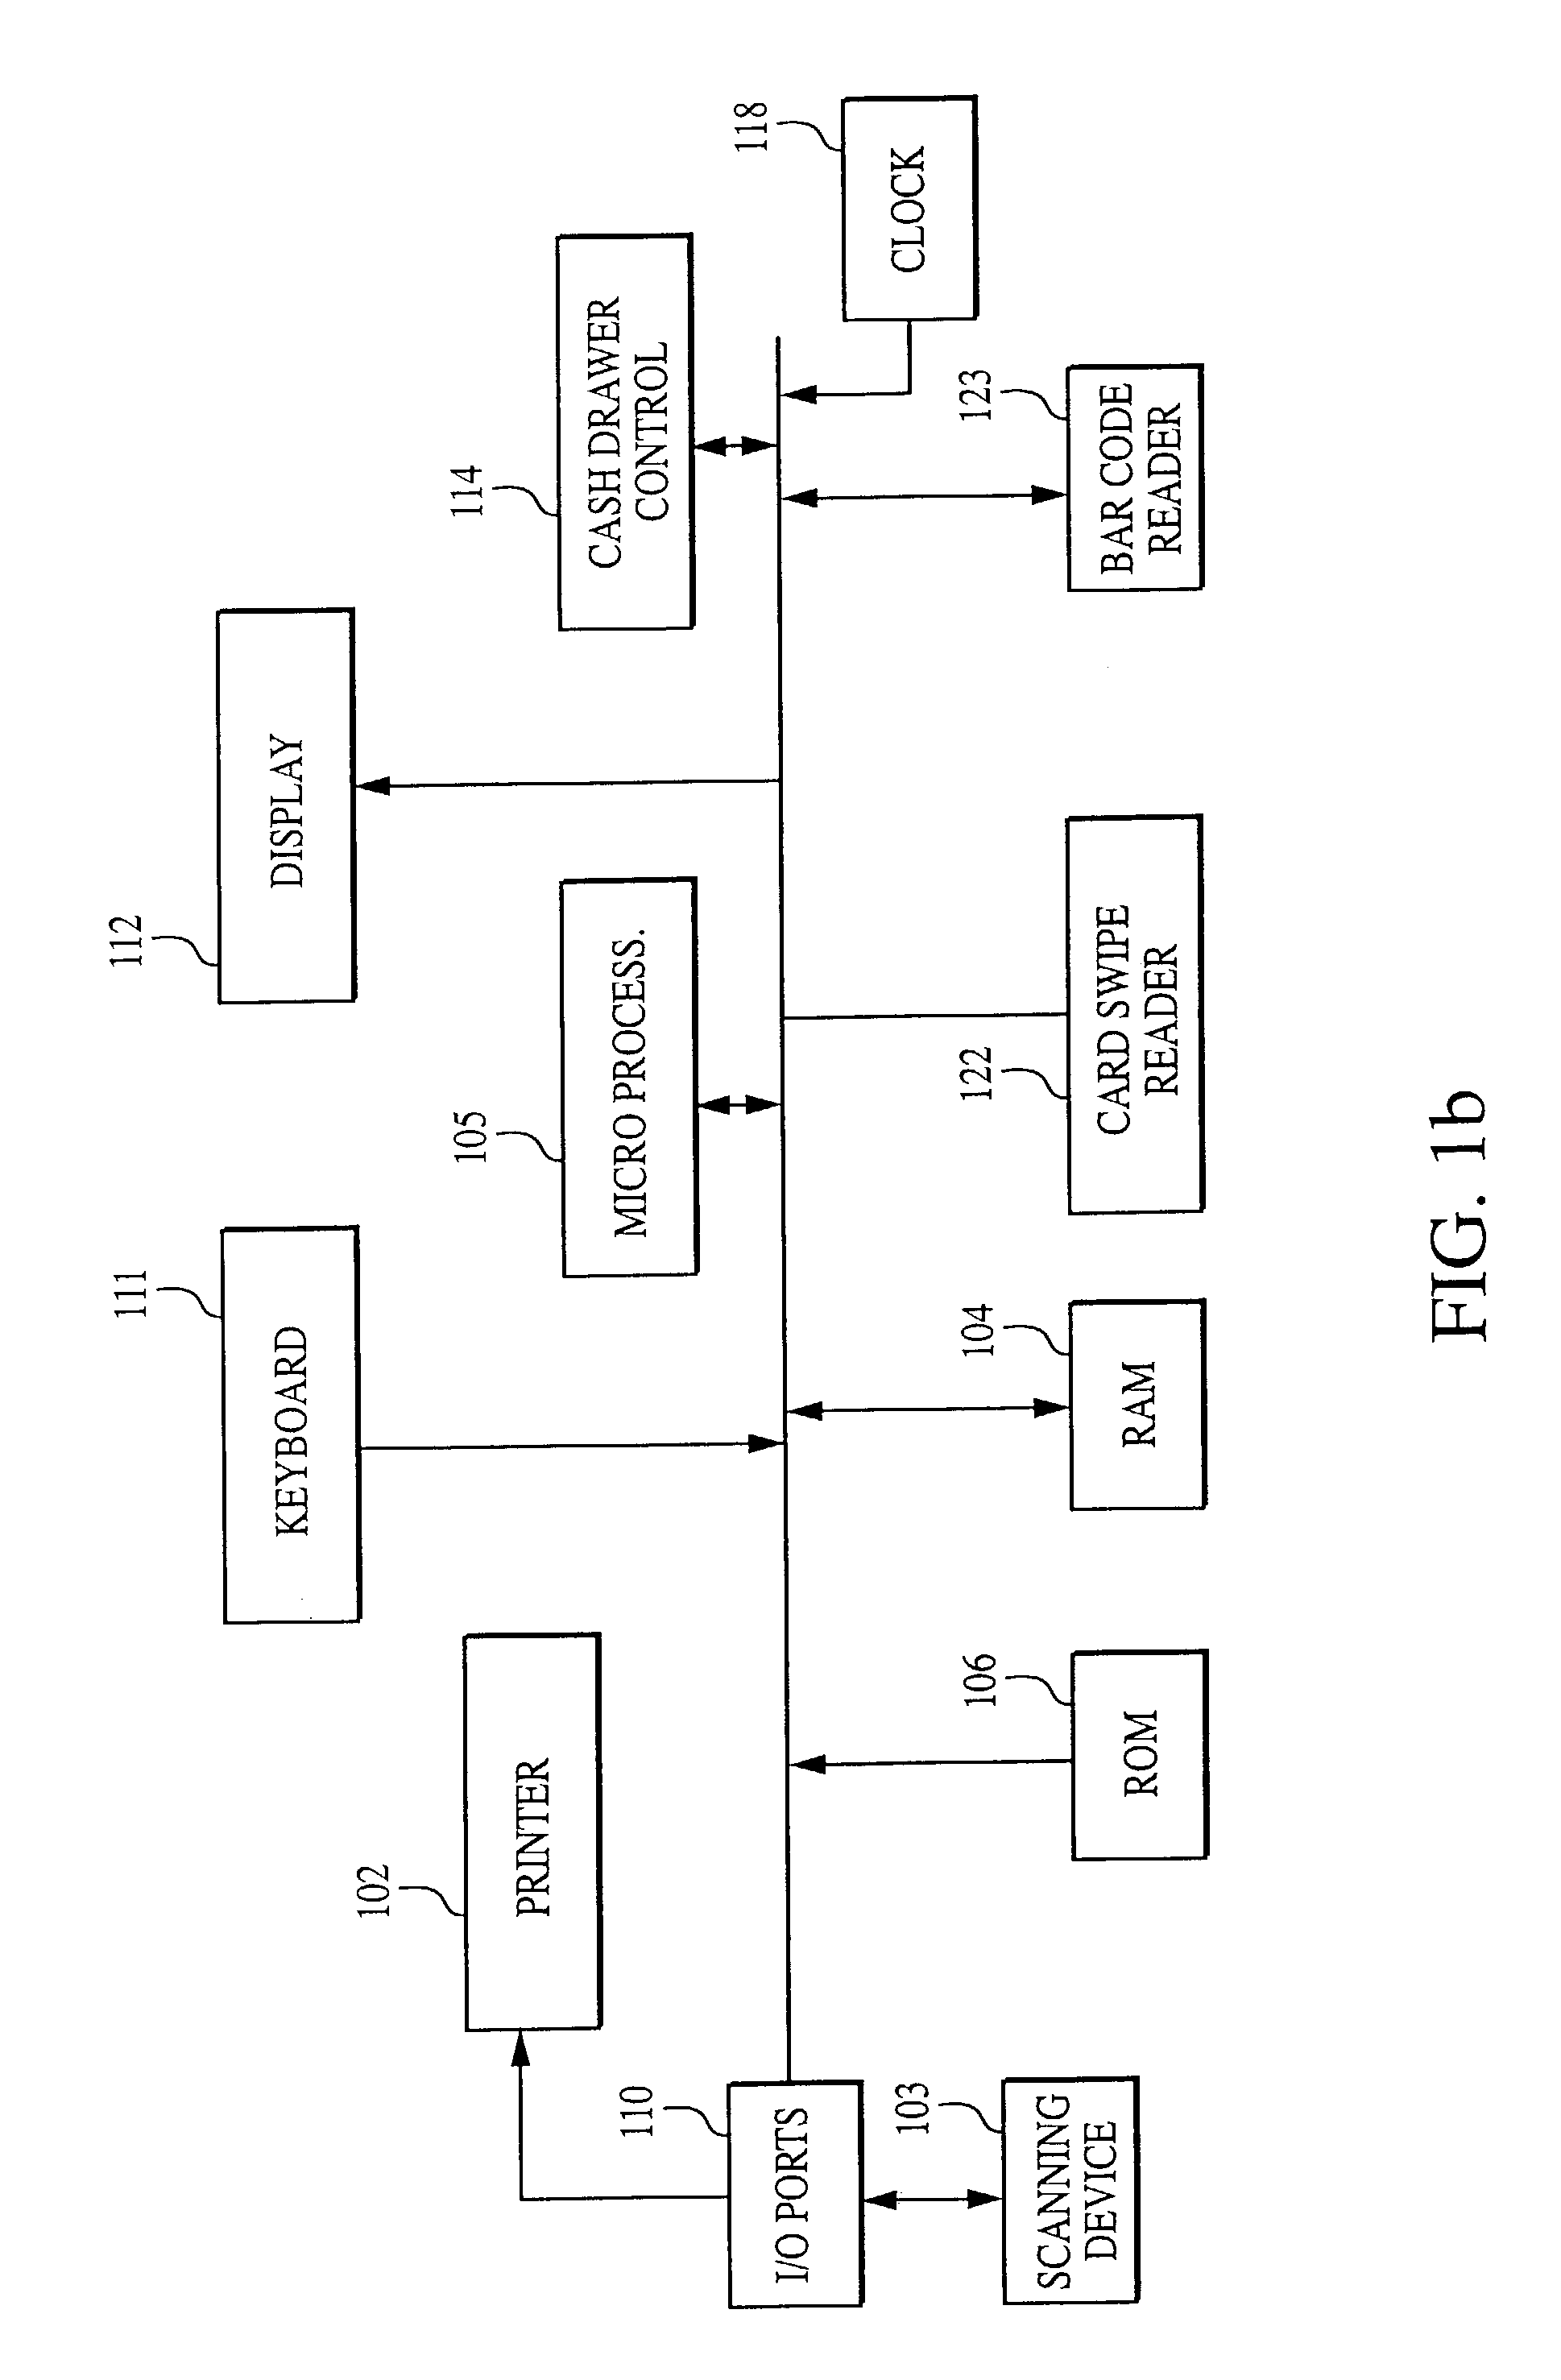 Method and apparatus for transferring and processing transaction data